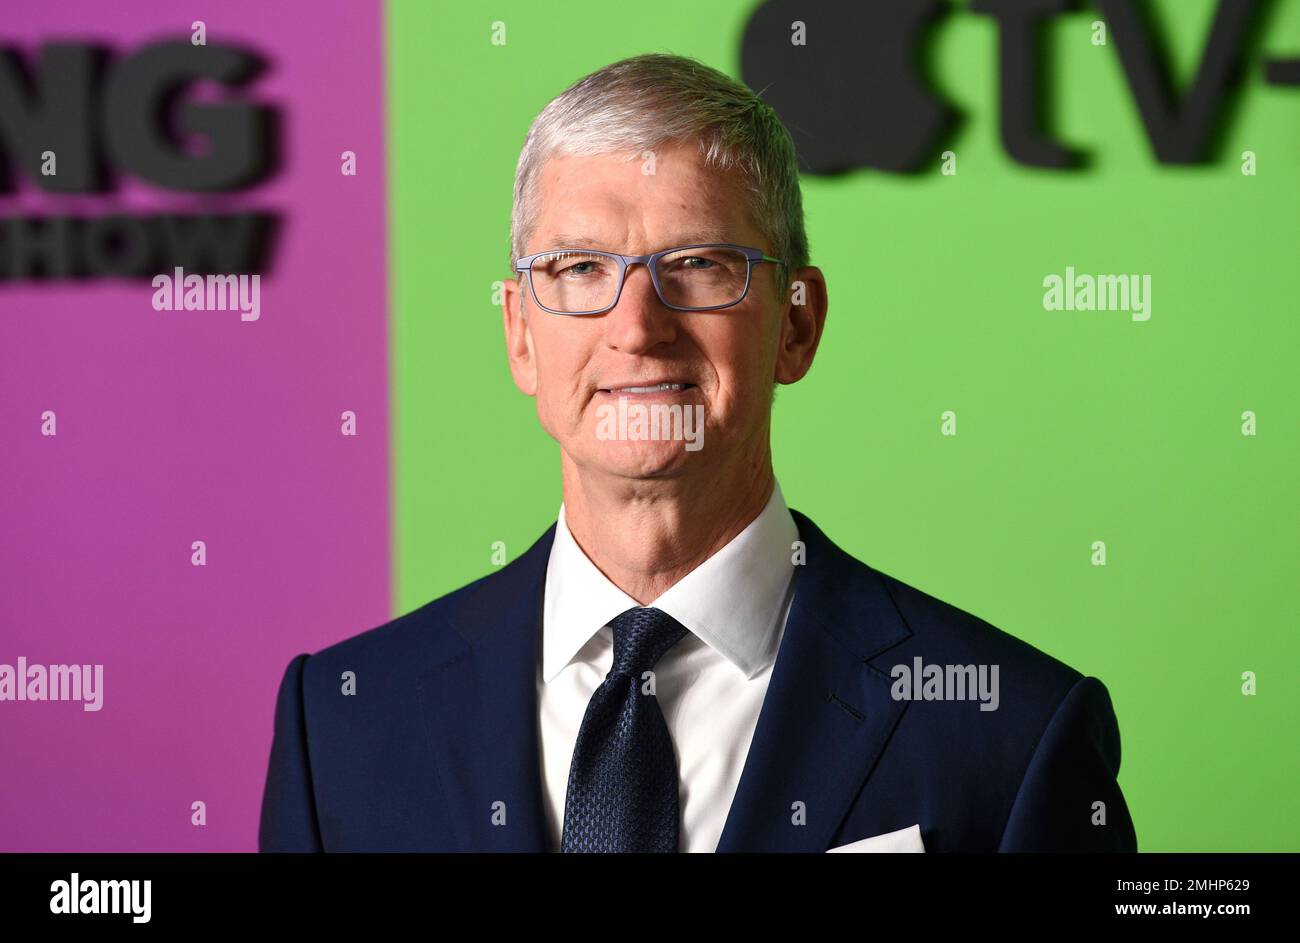 Apple CEO Tim Cook attends the world premiere of Apple TV+'s "The Morning Show" at David Geffen Hall at Lincoln Center on Monday, Oct. 28, in New York. (Photo by Evan Agostini/Invision/AP) Stock Photo